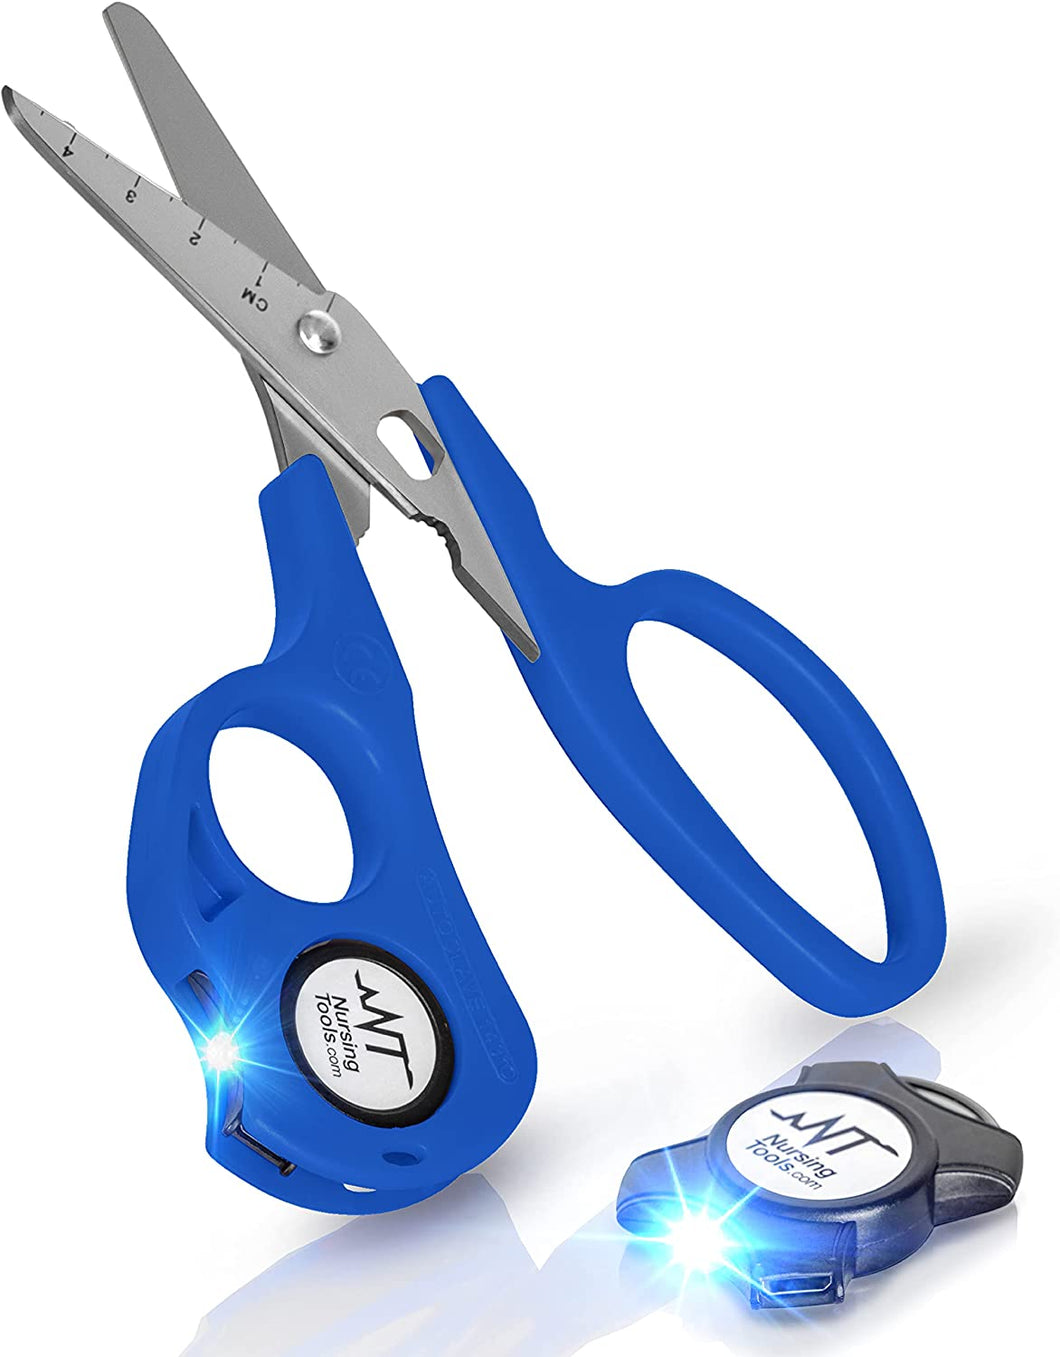 Night Owl Medical Scissors -  Multi-tool 5-in-1 Compact Trauma Shears for Medical Professionals with Rechargeable USB Light